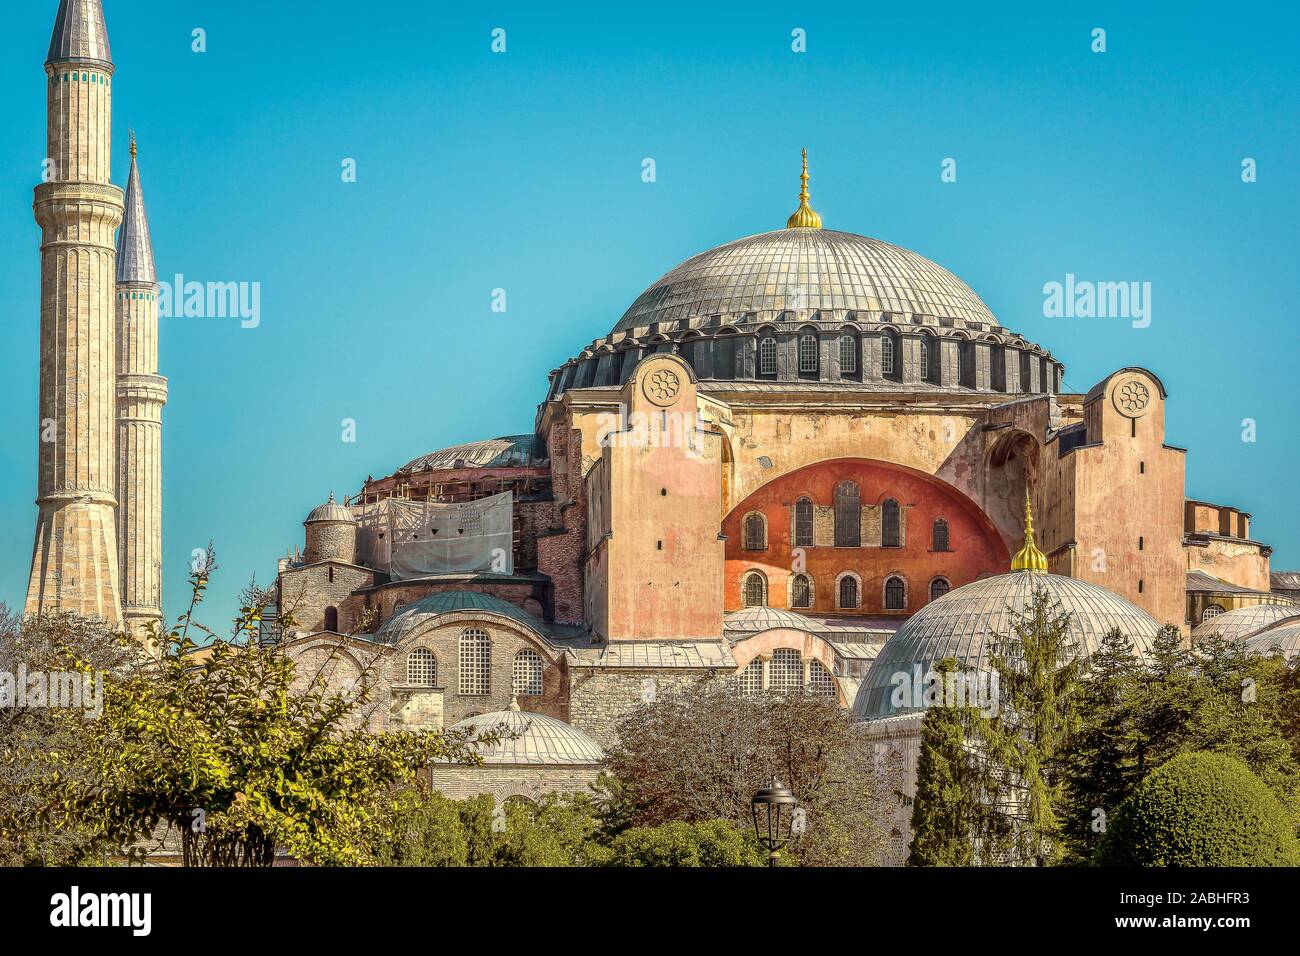 The facade of Hagia Sophia with two minarets and its huge cupola against the blue sky. Hagia Sophia was a Byzantine cathedral and Ottoman mosque built Stock Photo